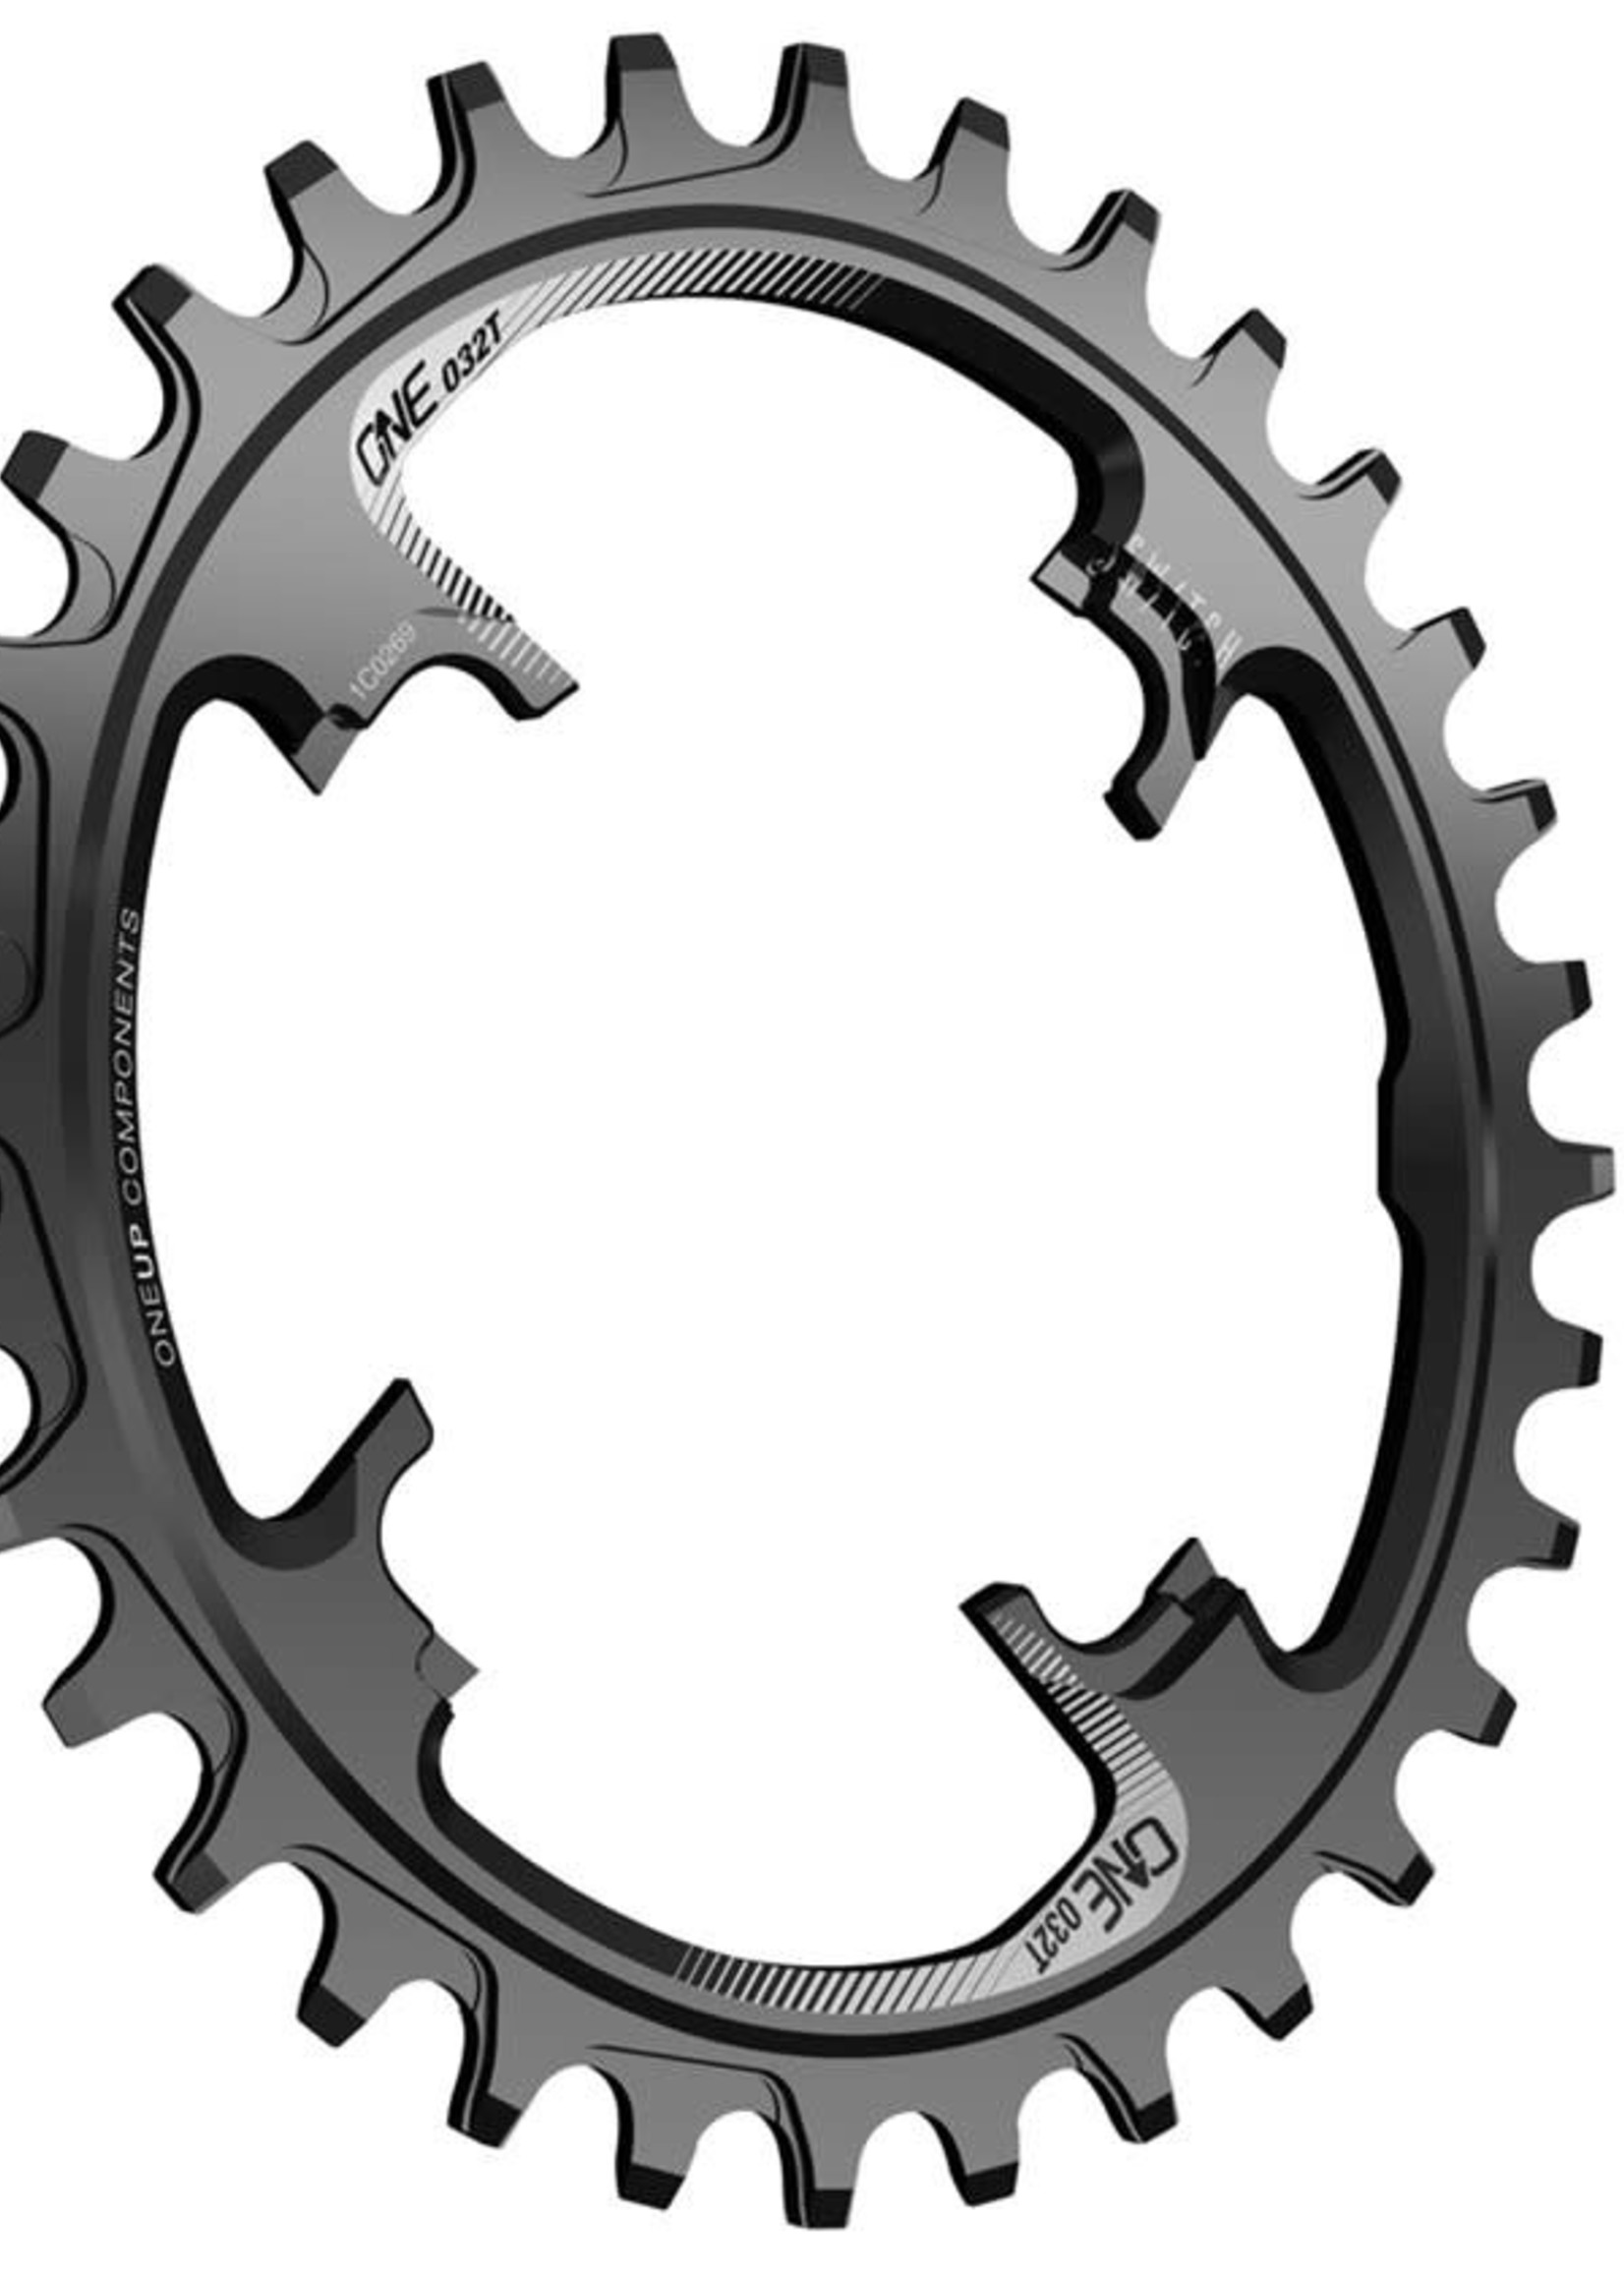 ONEUP Oneup Chainring Switch 9/10/11spd